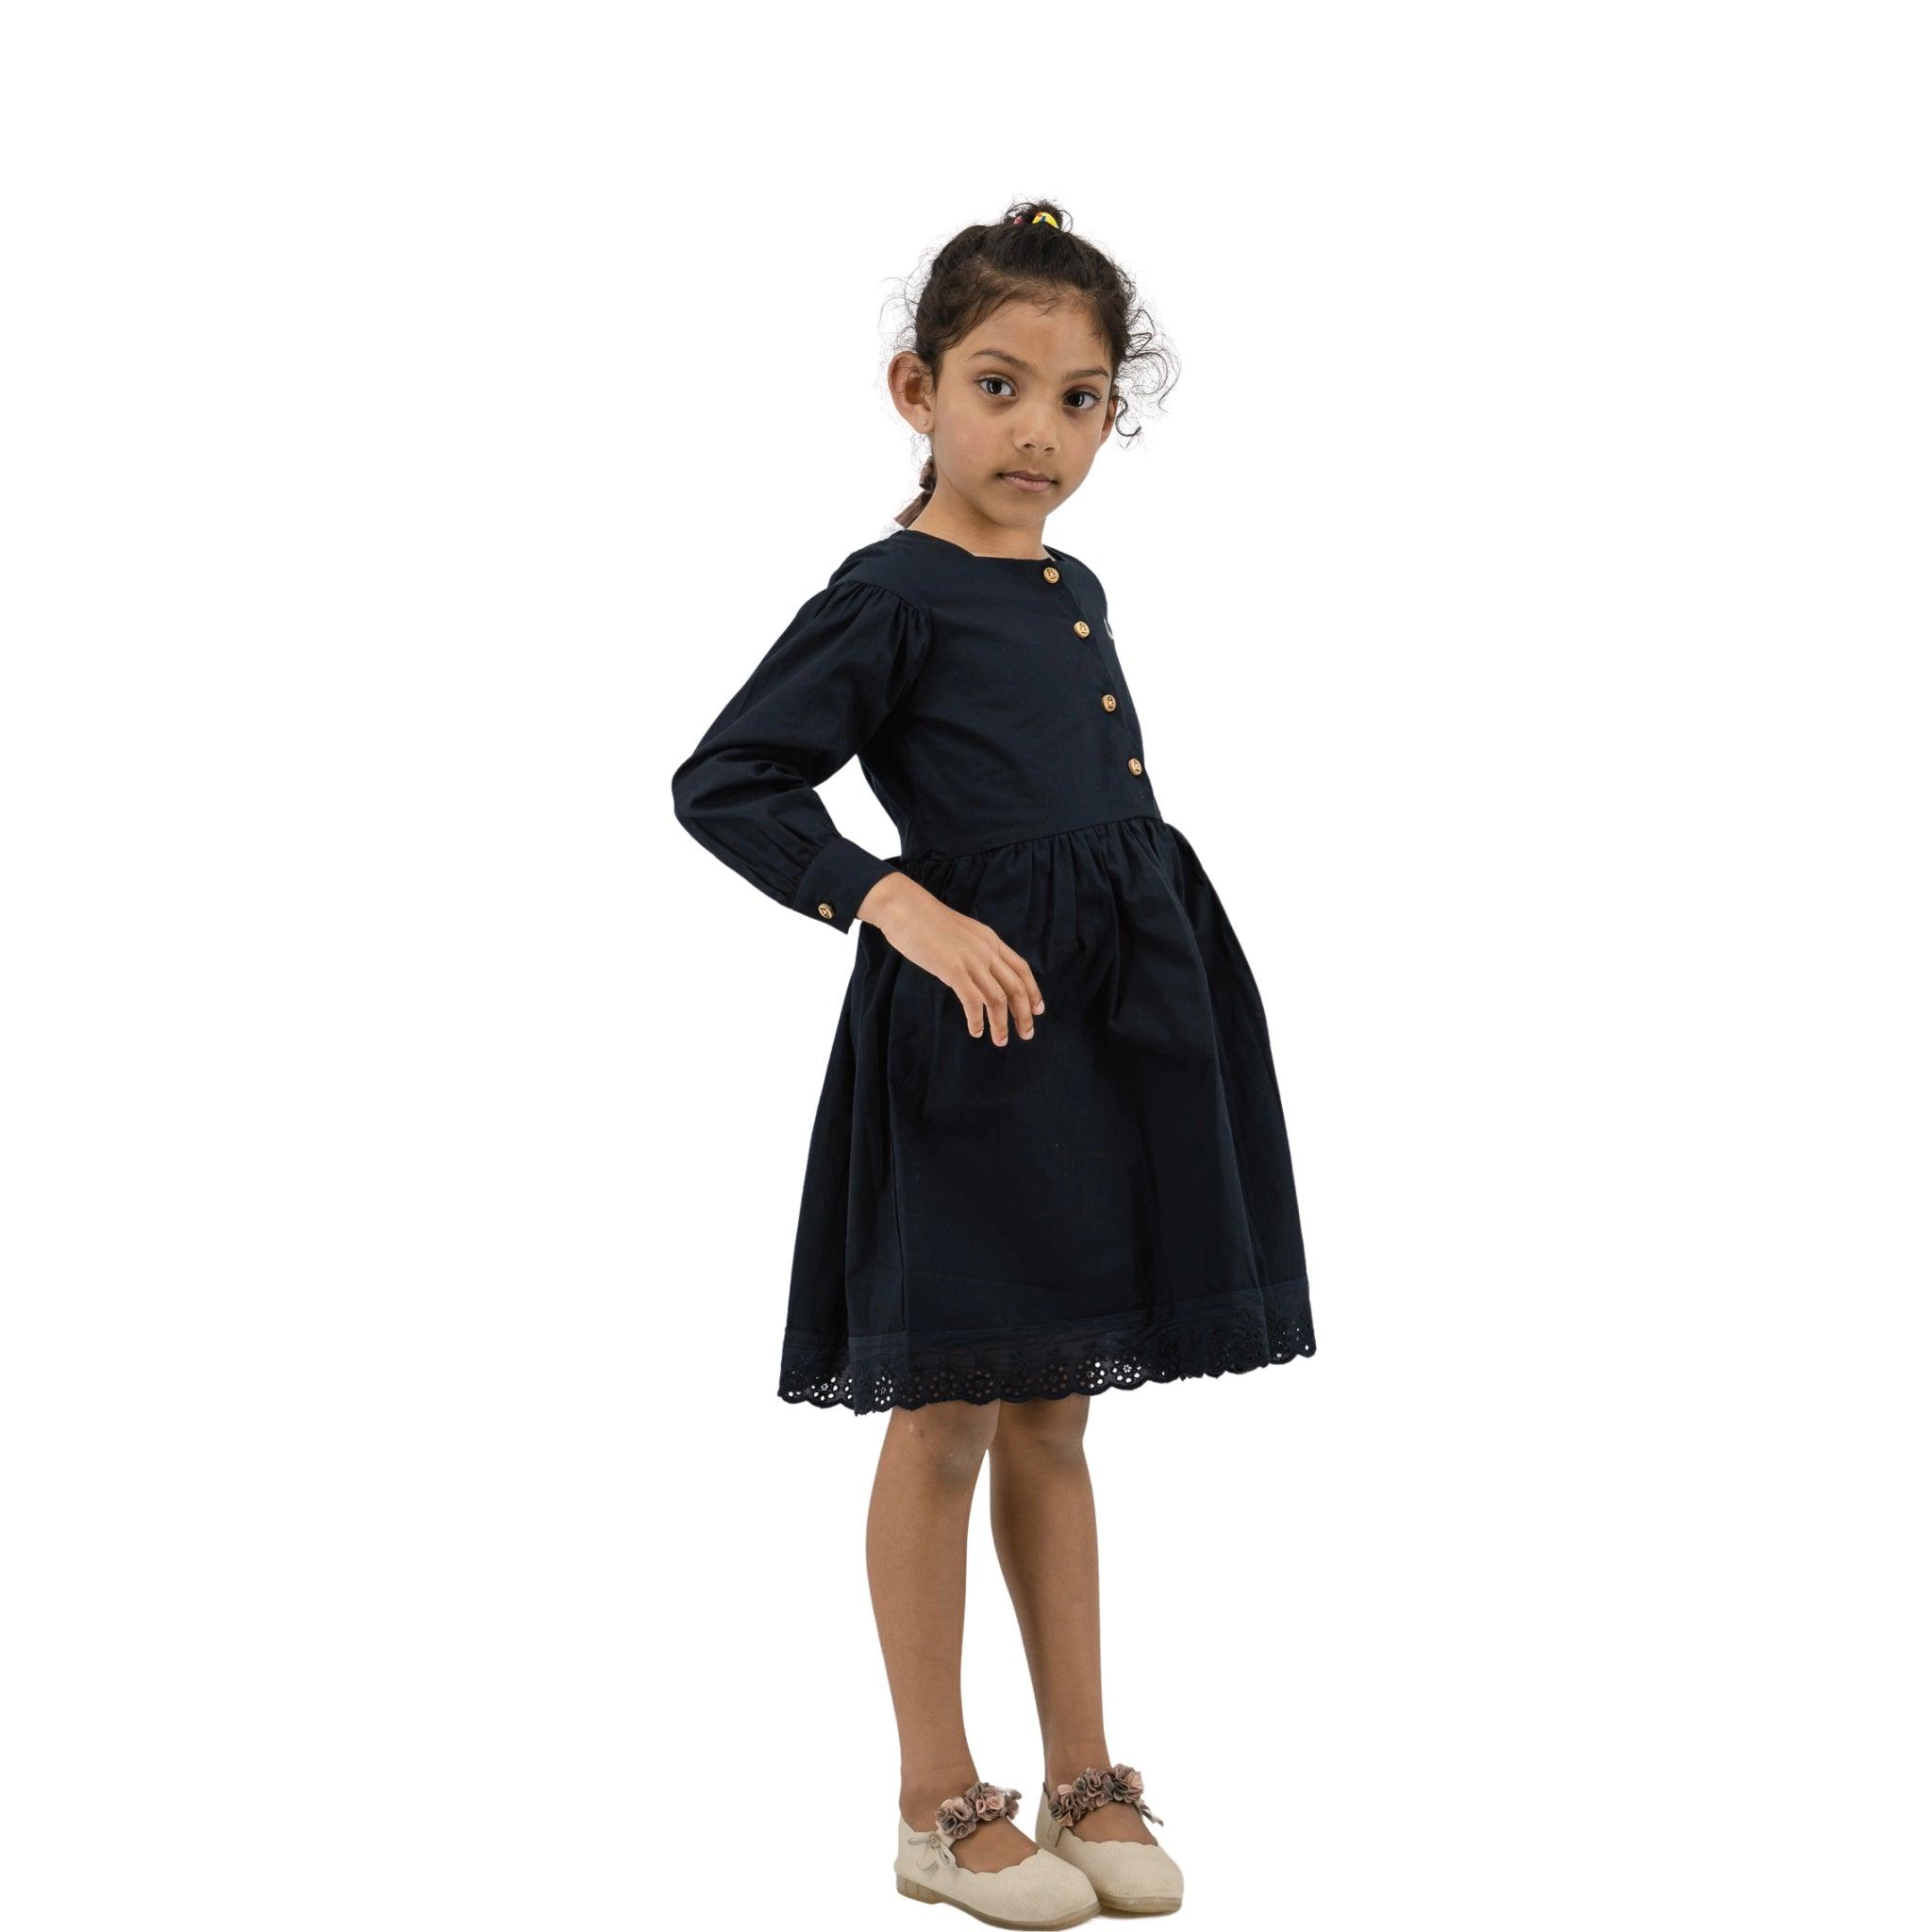 Young girl wearing a black Karee dress with long puff sleeves, button details, and lace trimming, standing sideways and looking towards the camera.